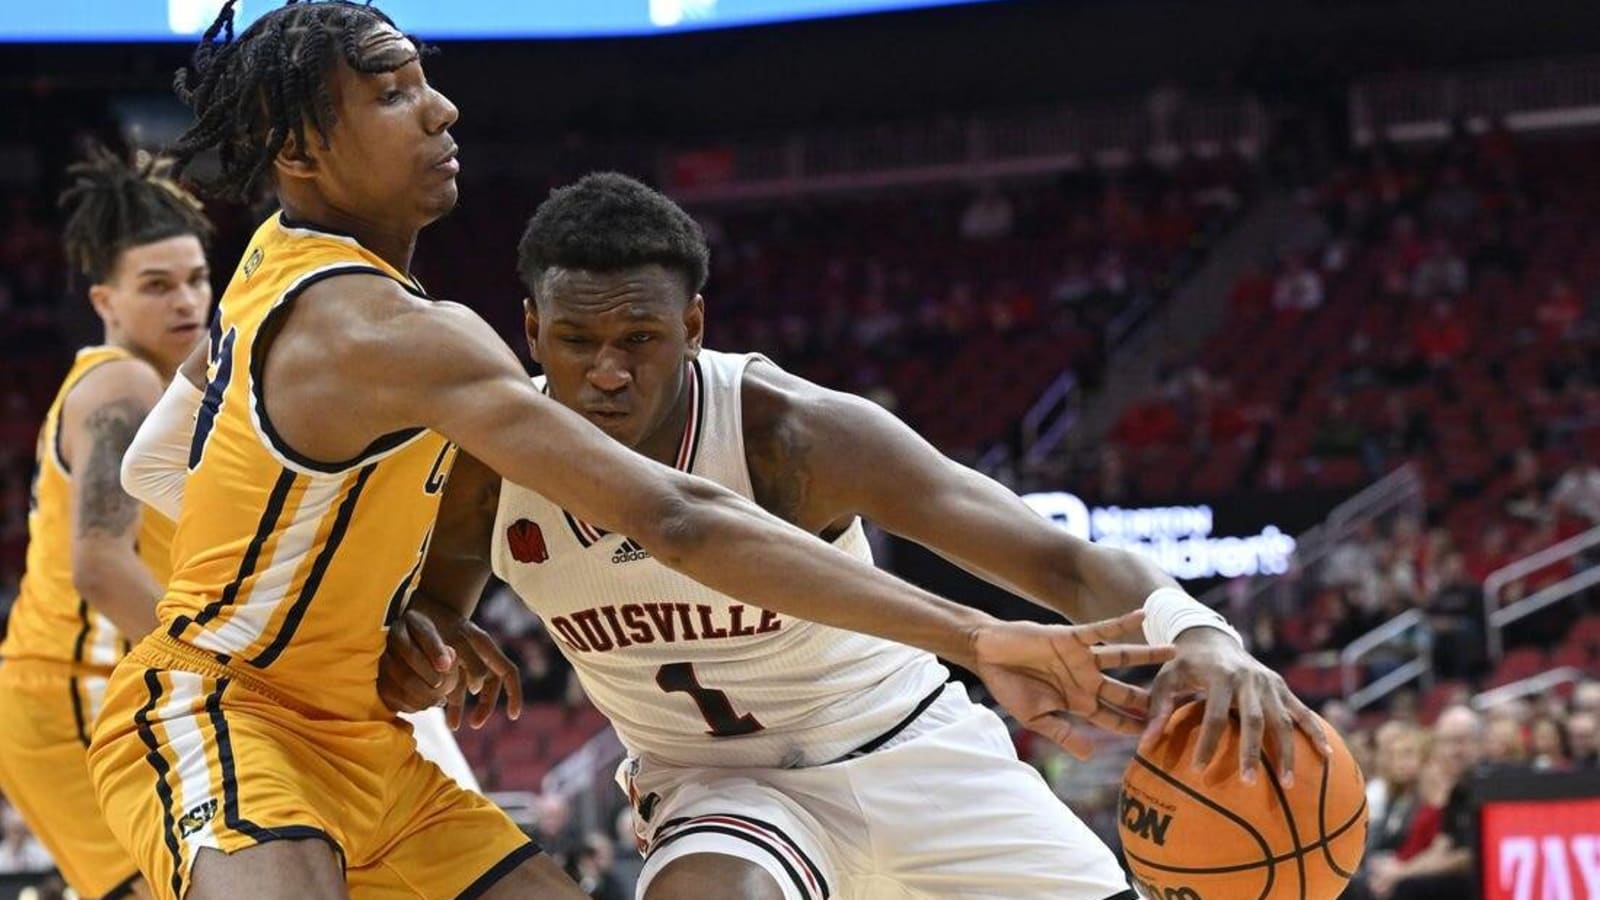 Louisville cruises past Coppin State